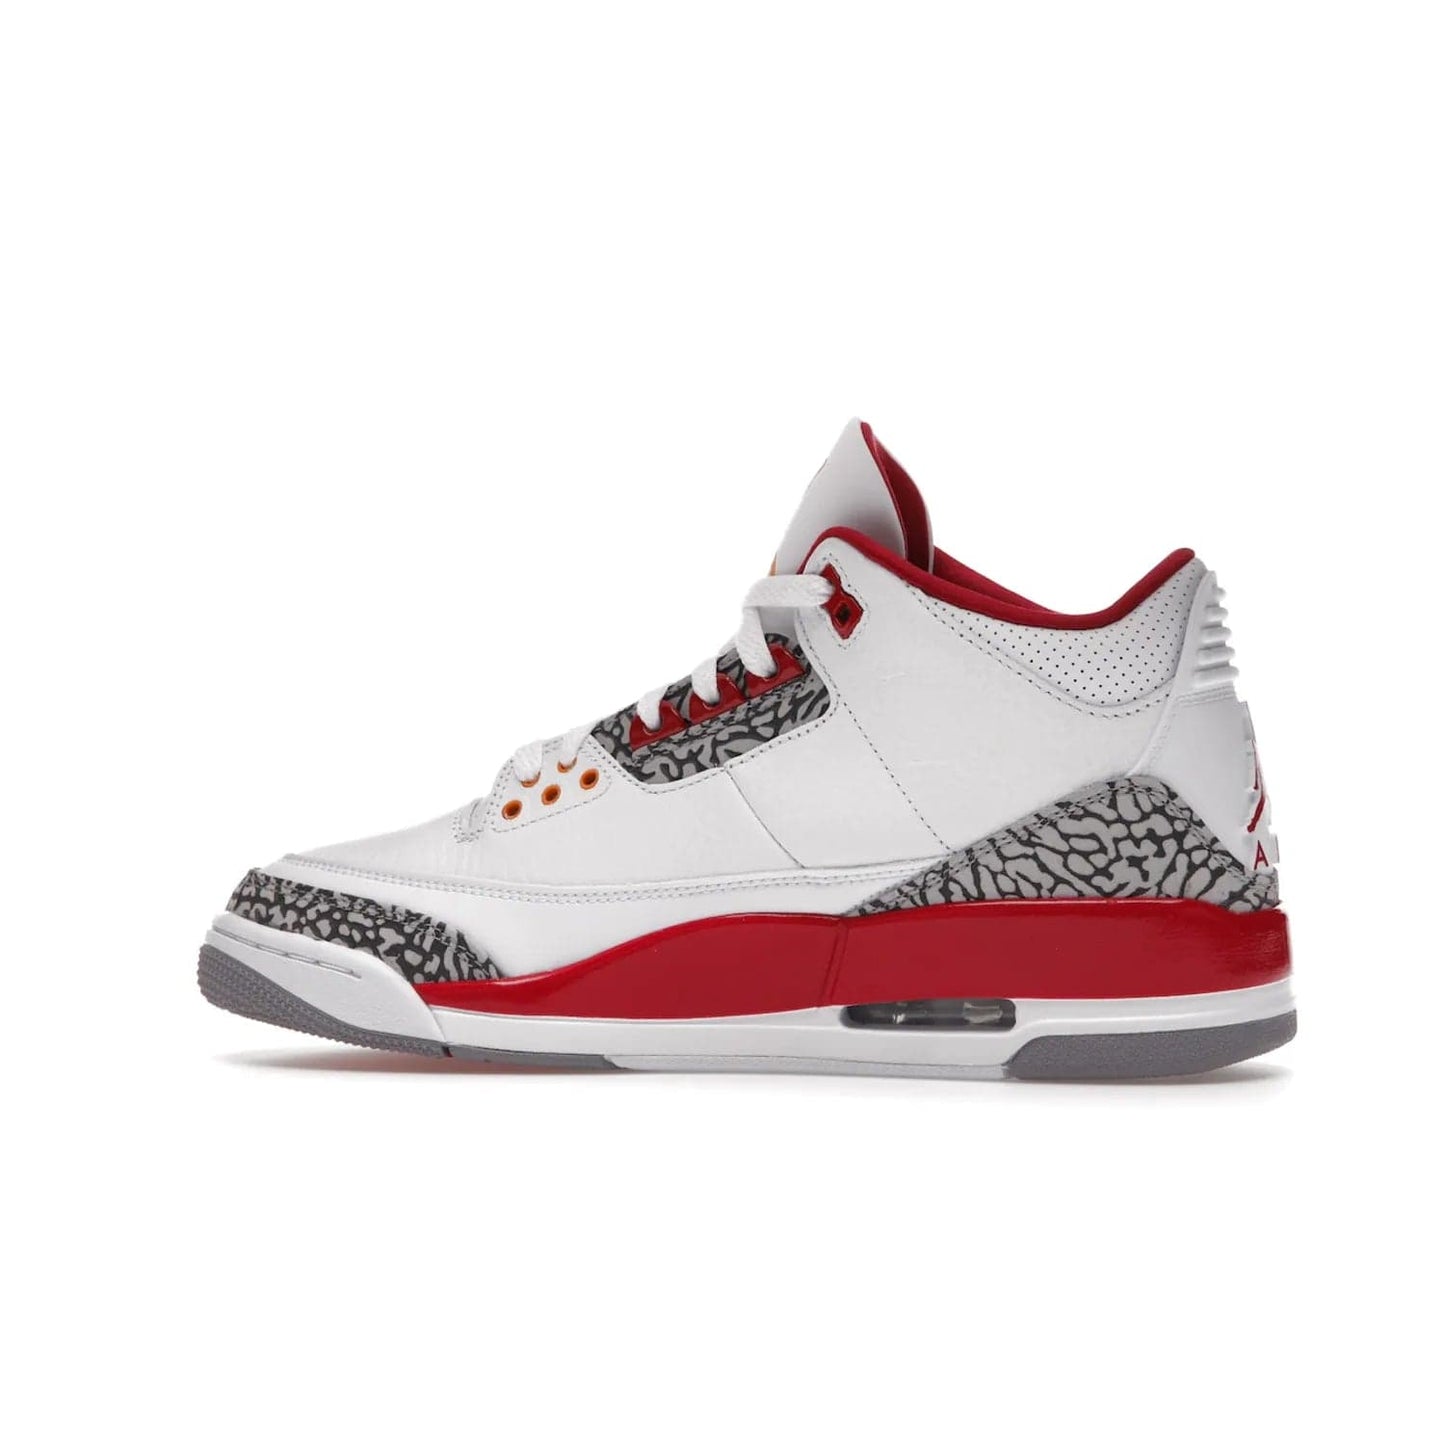 Jordan 3 Retro Cardinal Red - Image 21 - Only at www.BallersClubKickz.com - Air Jordan 3 Retro Cardinal Red combines classic style and modern appeal - white tumbled leather, signature Elephant Print overlays, cardinal red midsoles, Jumpman logo embroidery. Available Feb 2022.